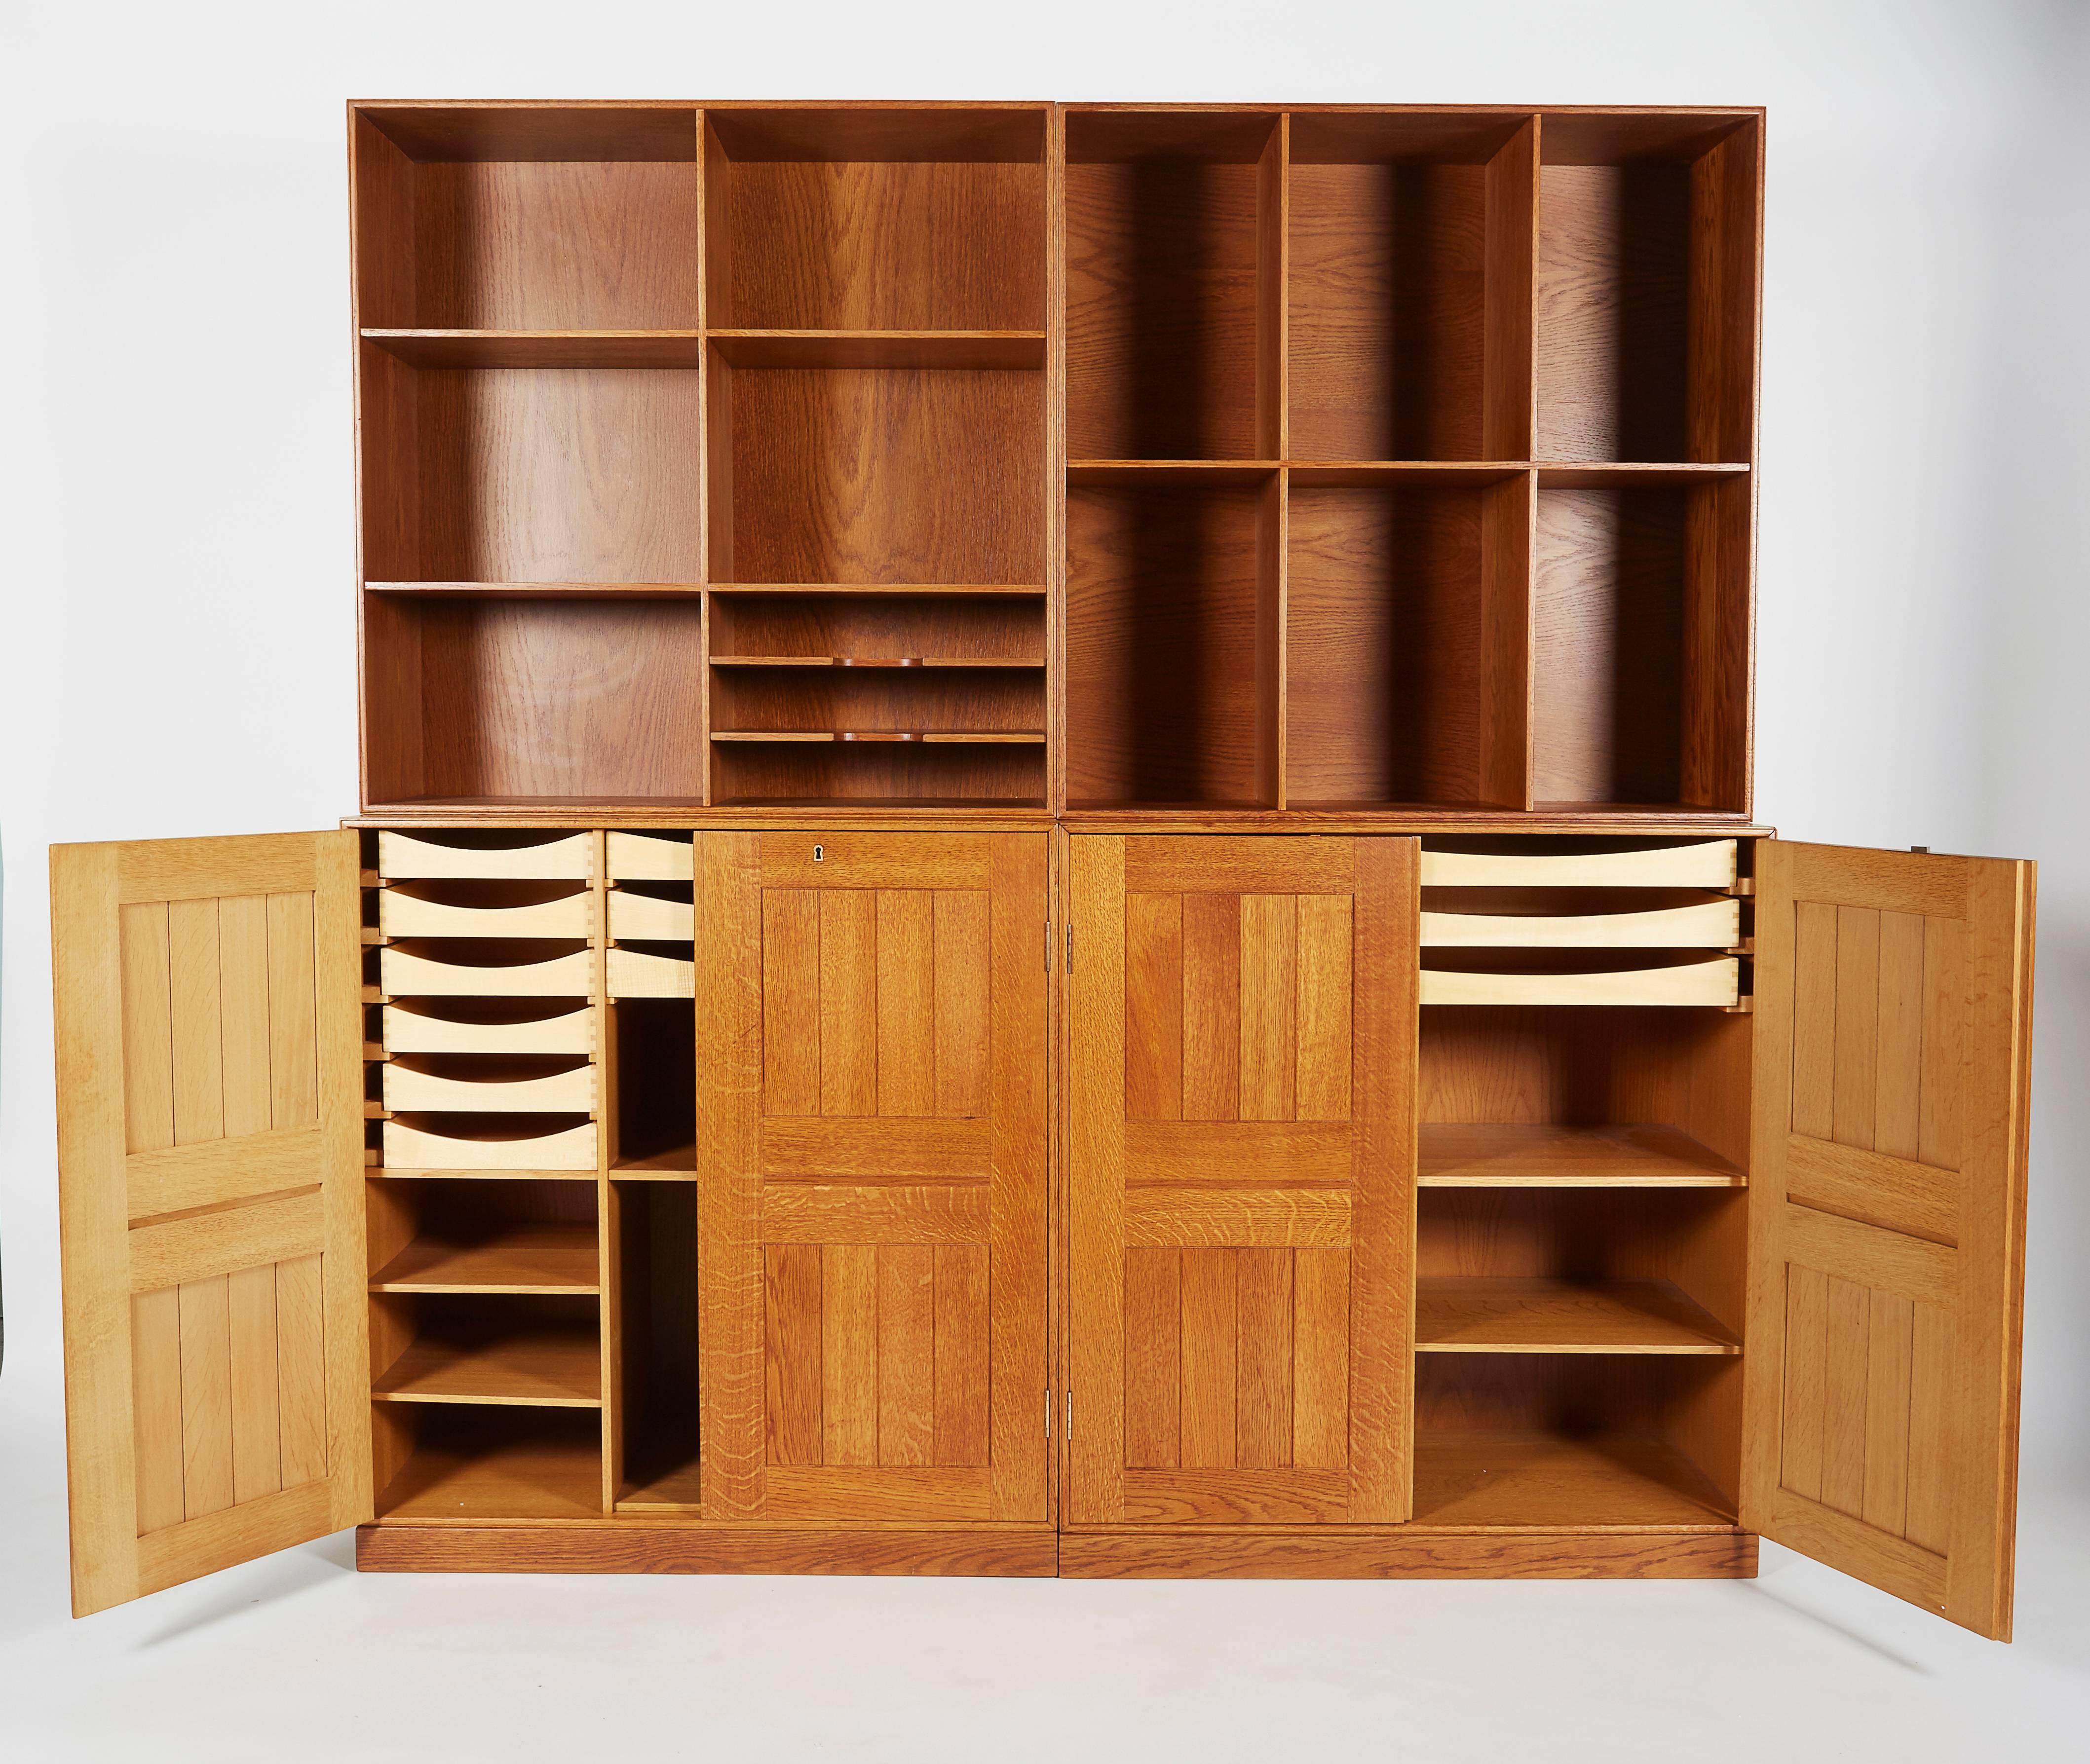 His bookcase was first designed for his own private home and reflected the small rooms in most people's houses that required a flexible bookcase or cabinet. There is an extra base allowing stacking the two bookcases leaving the two cabinets on their